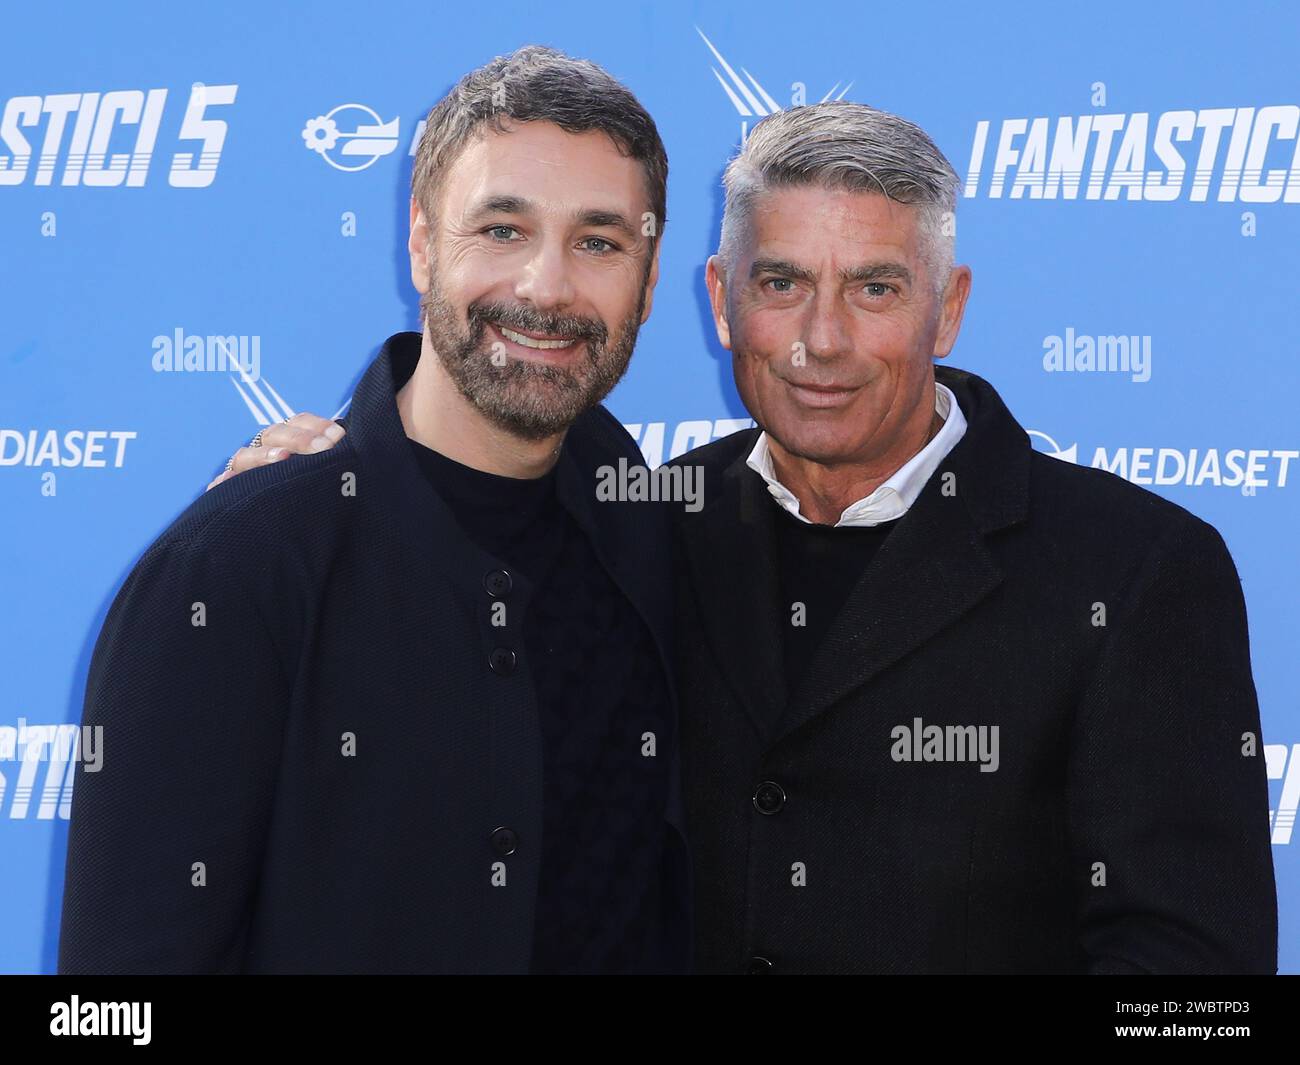 Rome, Italy. 12th Jan, 2024. Rome, Casa del Cinema, photocall for the TV series 'The Fantastic 5'. In the photo: Raoul Bova, Giorgio Restelli Credit: Independent Photo Agency/Alamy Live News Stock Photo